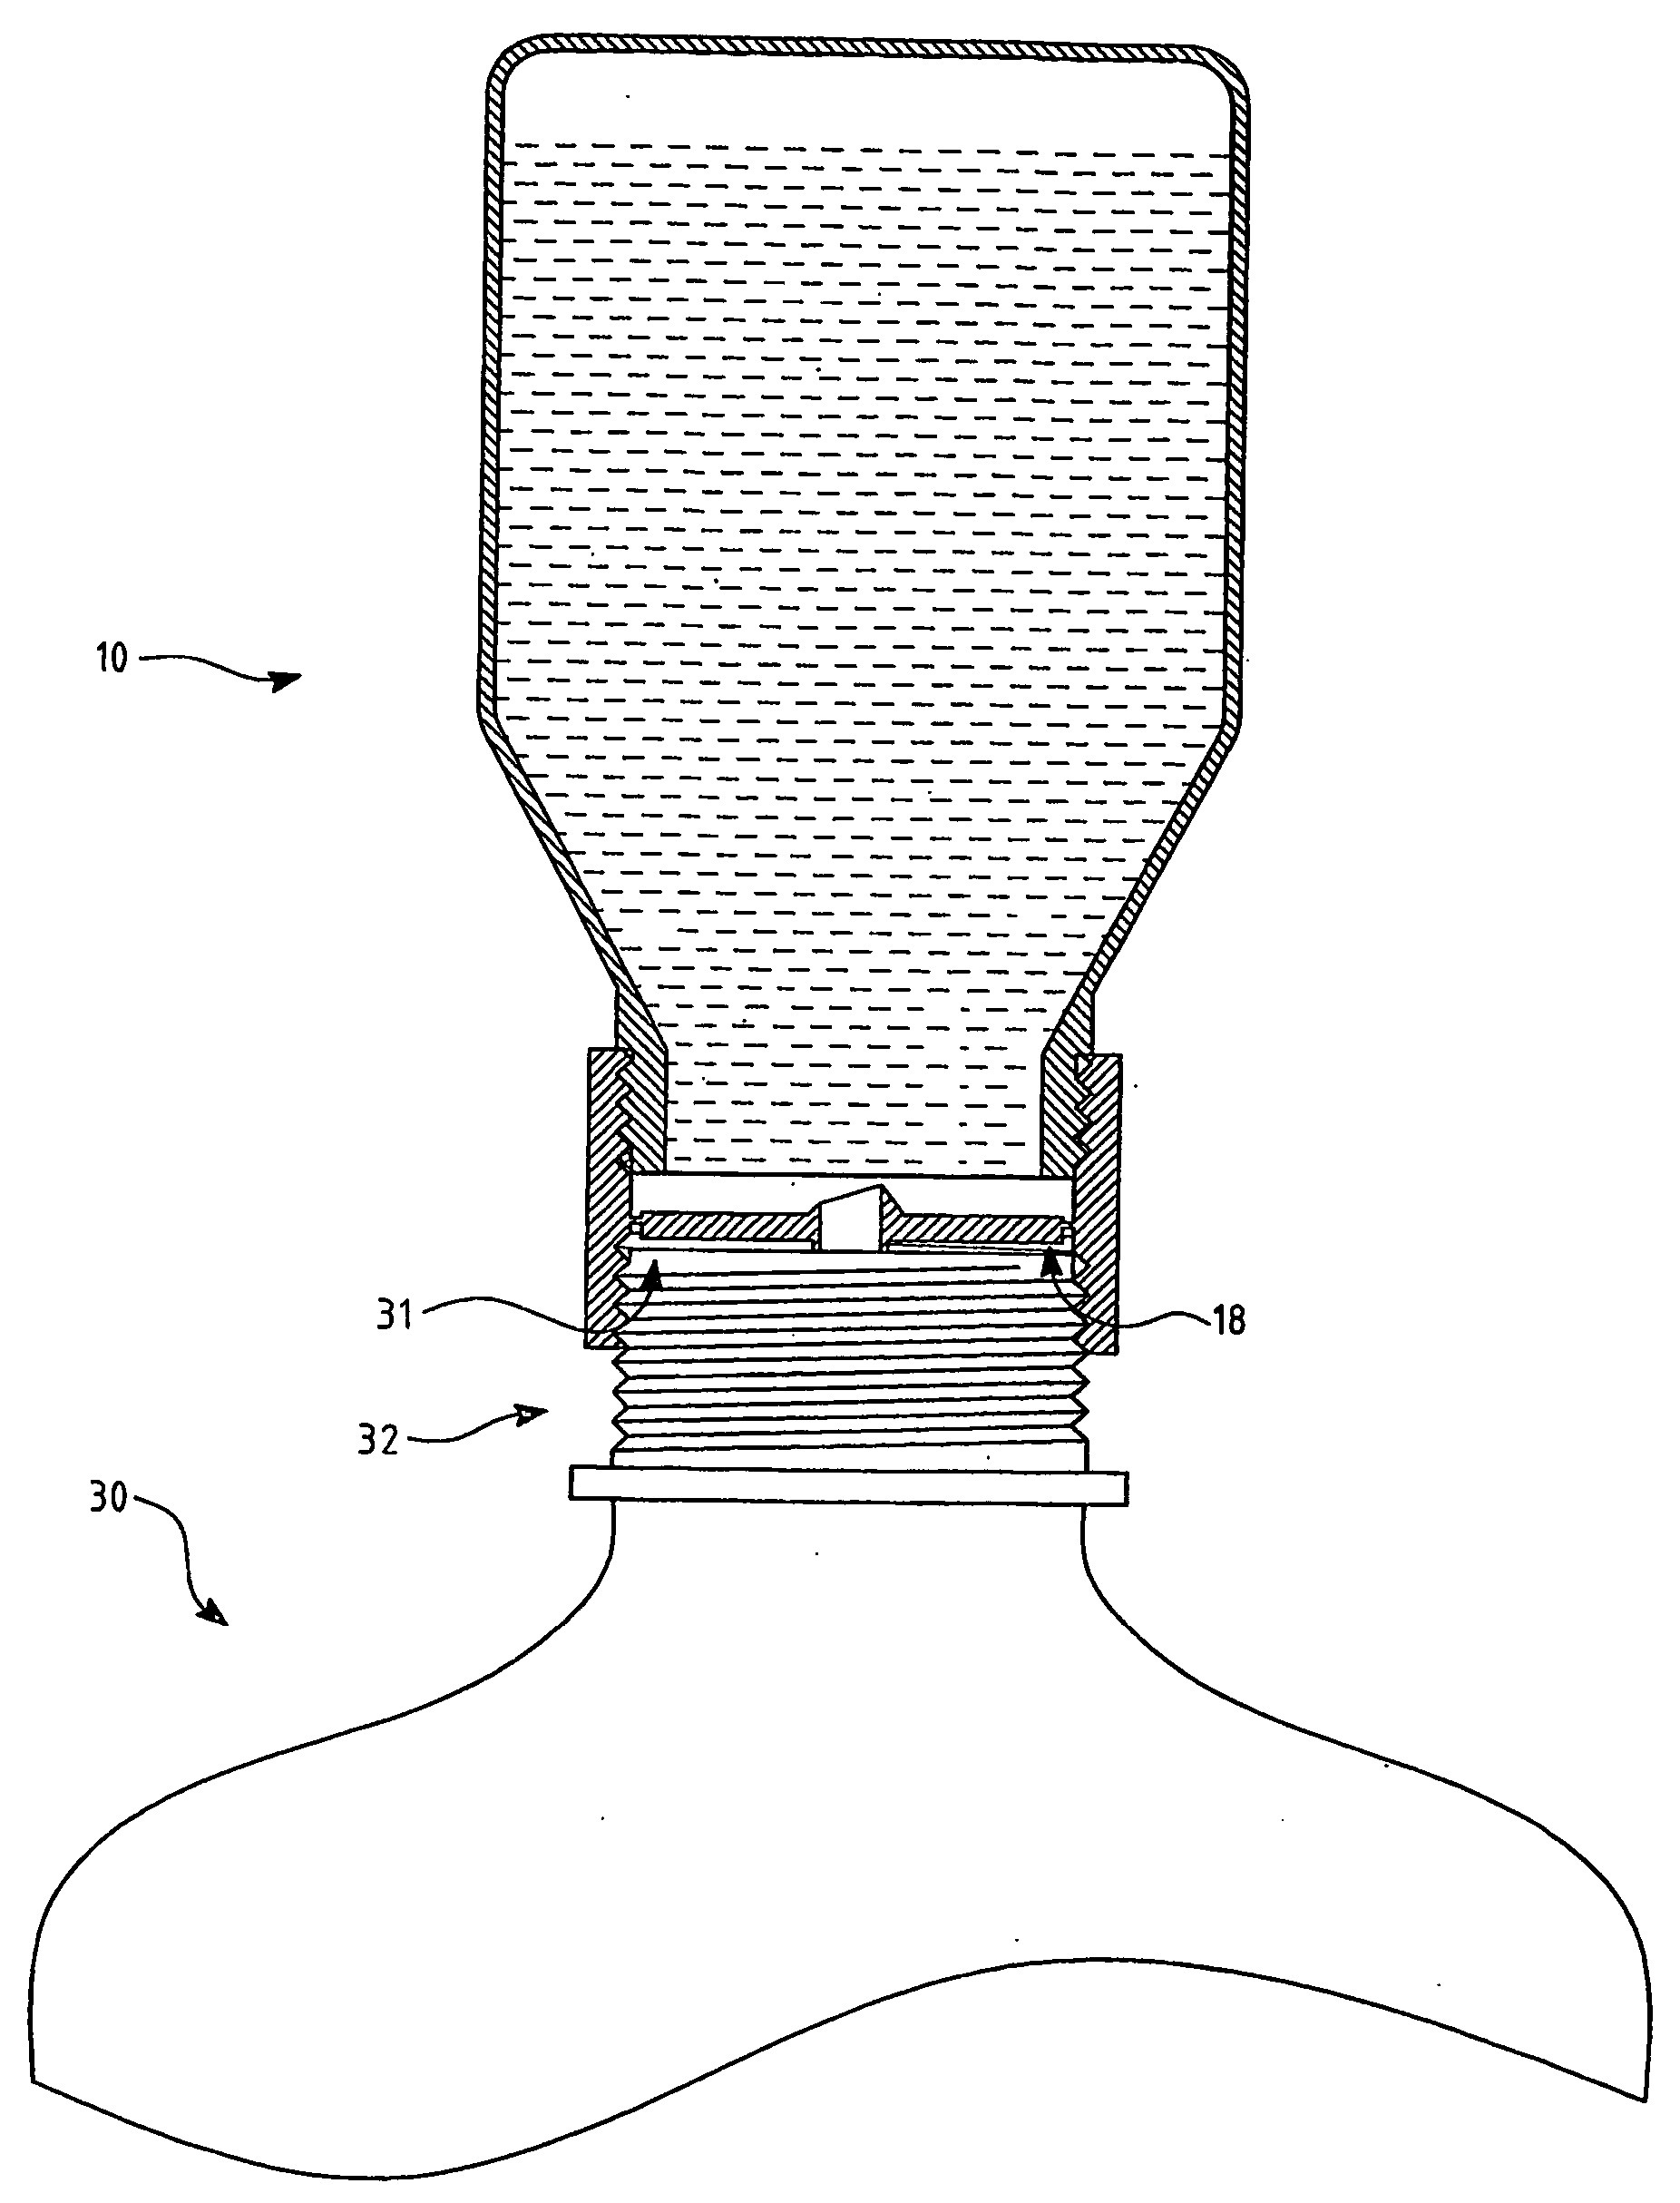 System for combining liquids